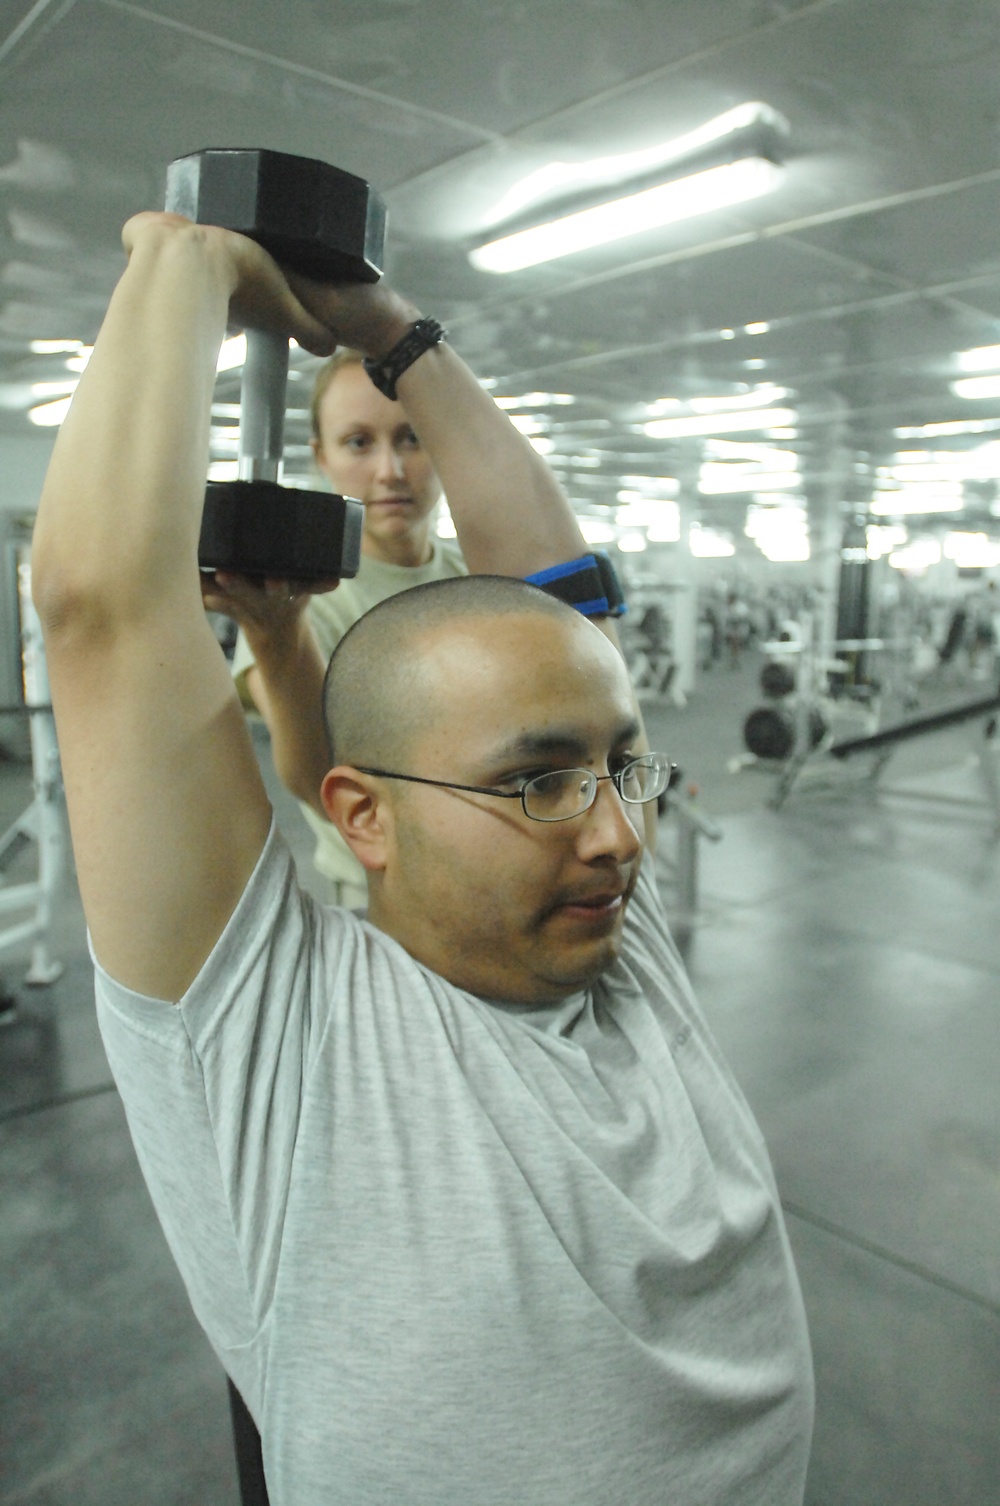 Deployed Airman helps others' fitness plans take shape